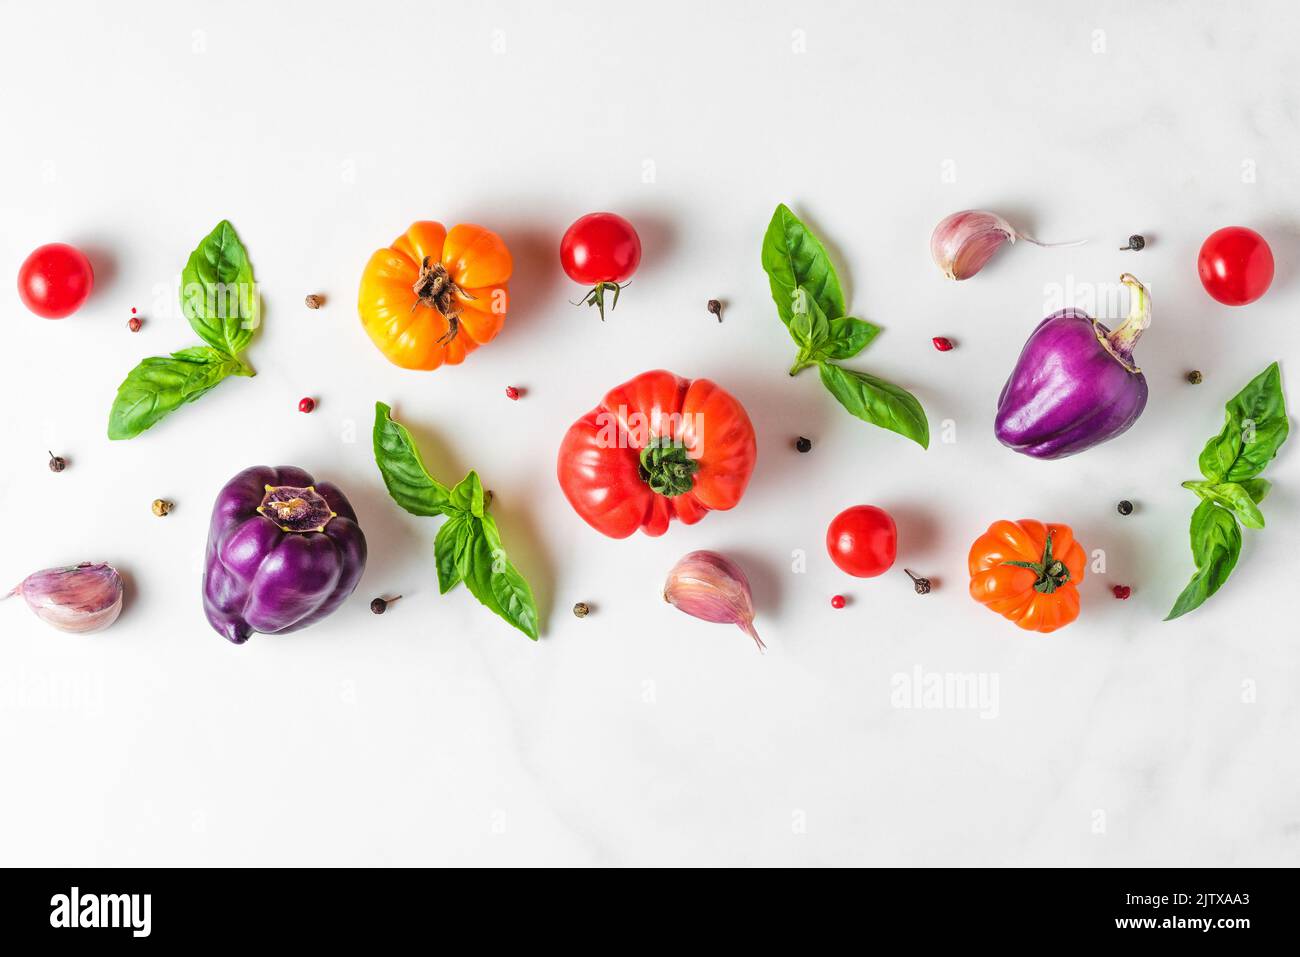 Creative layout made of tomatoes, pepper, garlic, basil leaves. Flat lay. Top view. Food composition. Vegetables isolated on white background. Food in Stock Photo